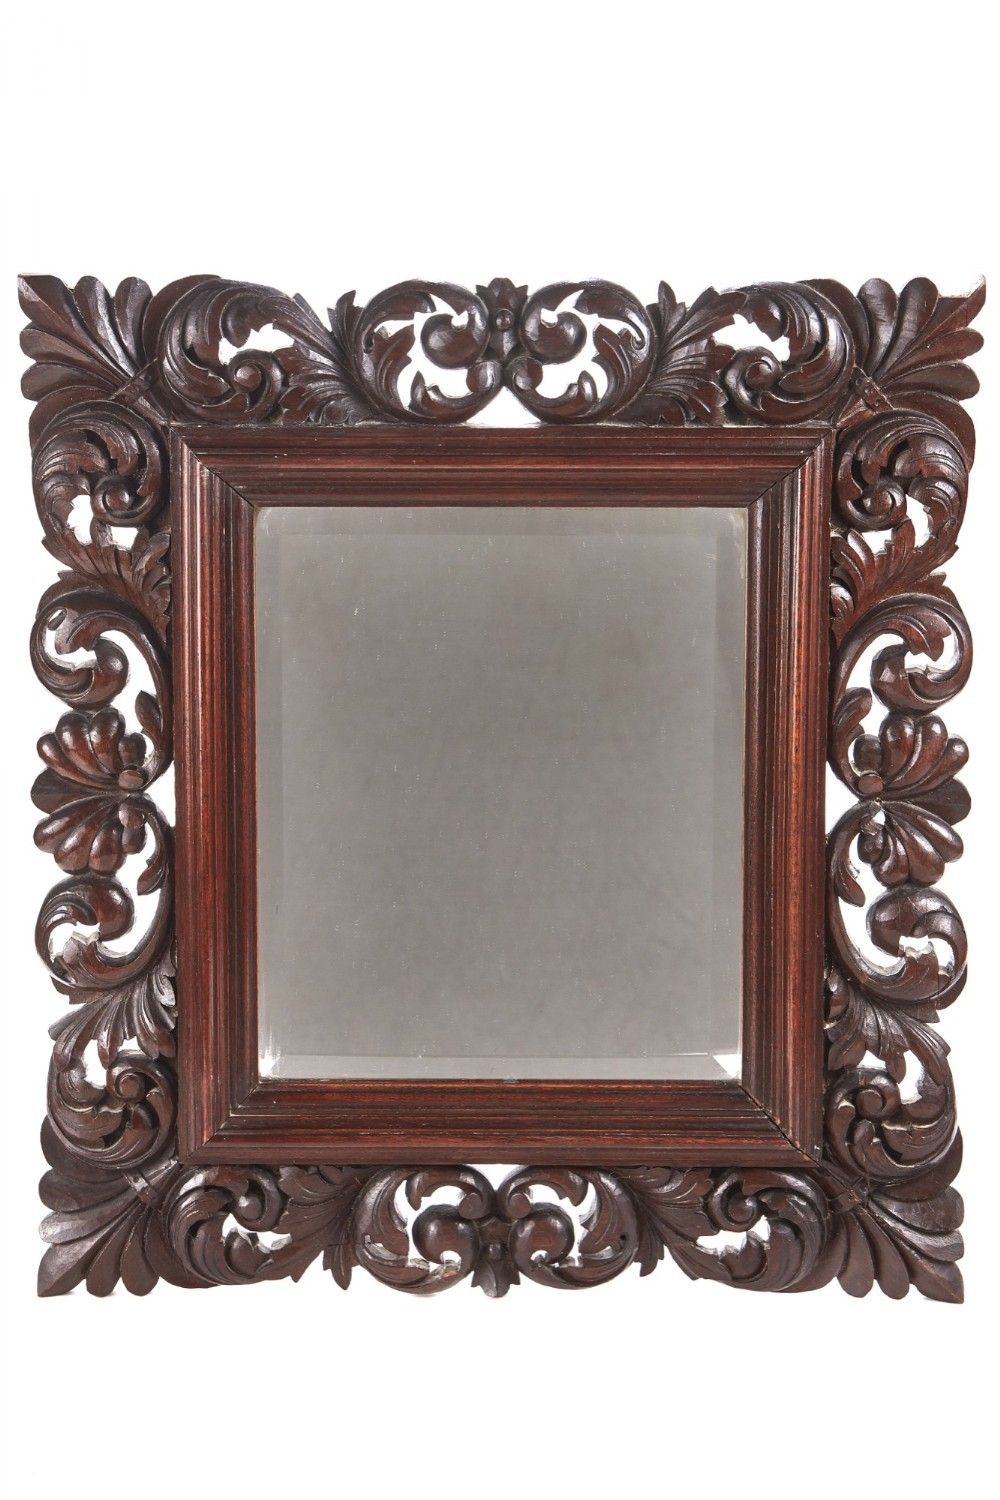 Outstanding Quality Antique Carved Walnut Wall Mirror | 587712 Regarding Walnut Wall Mirrors (View 7 of 15)